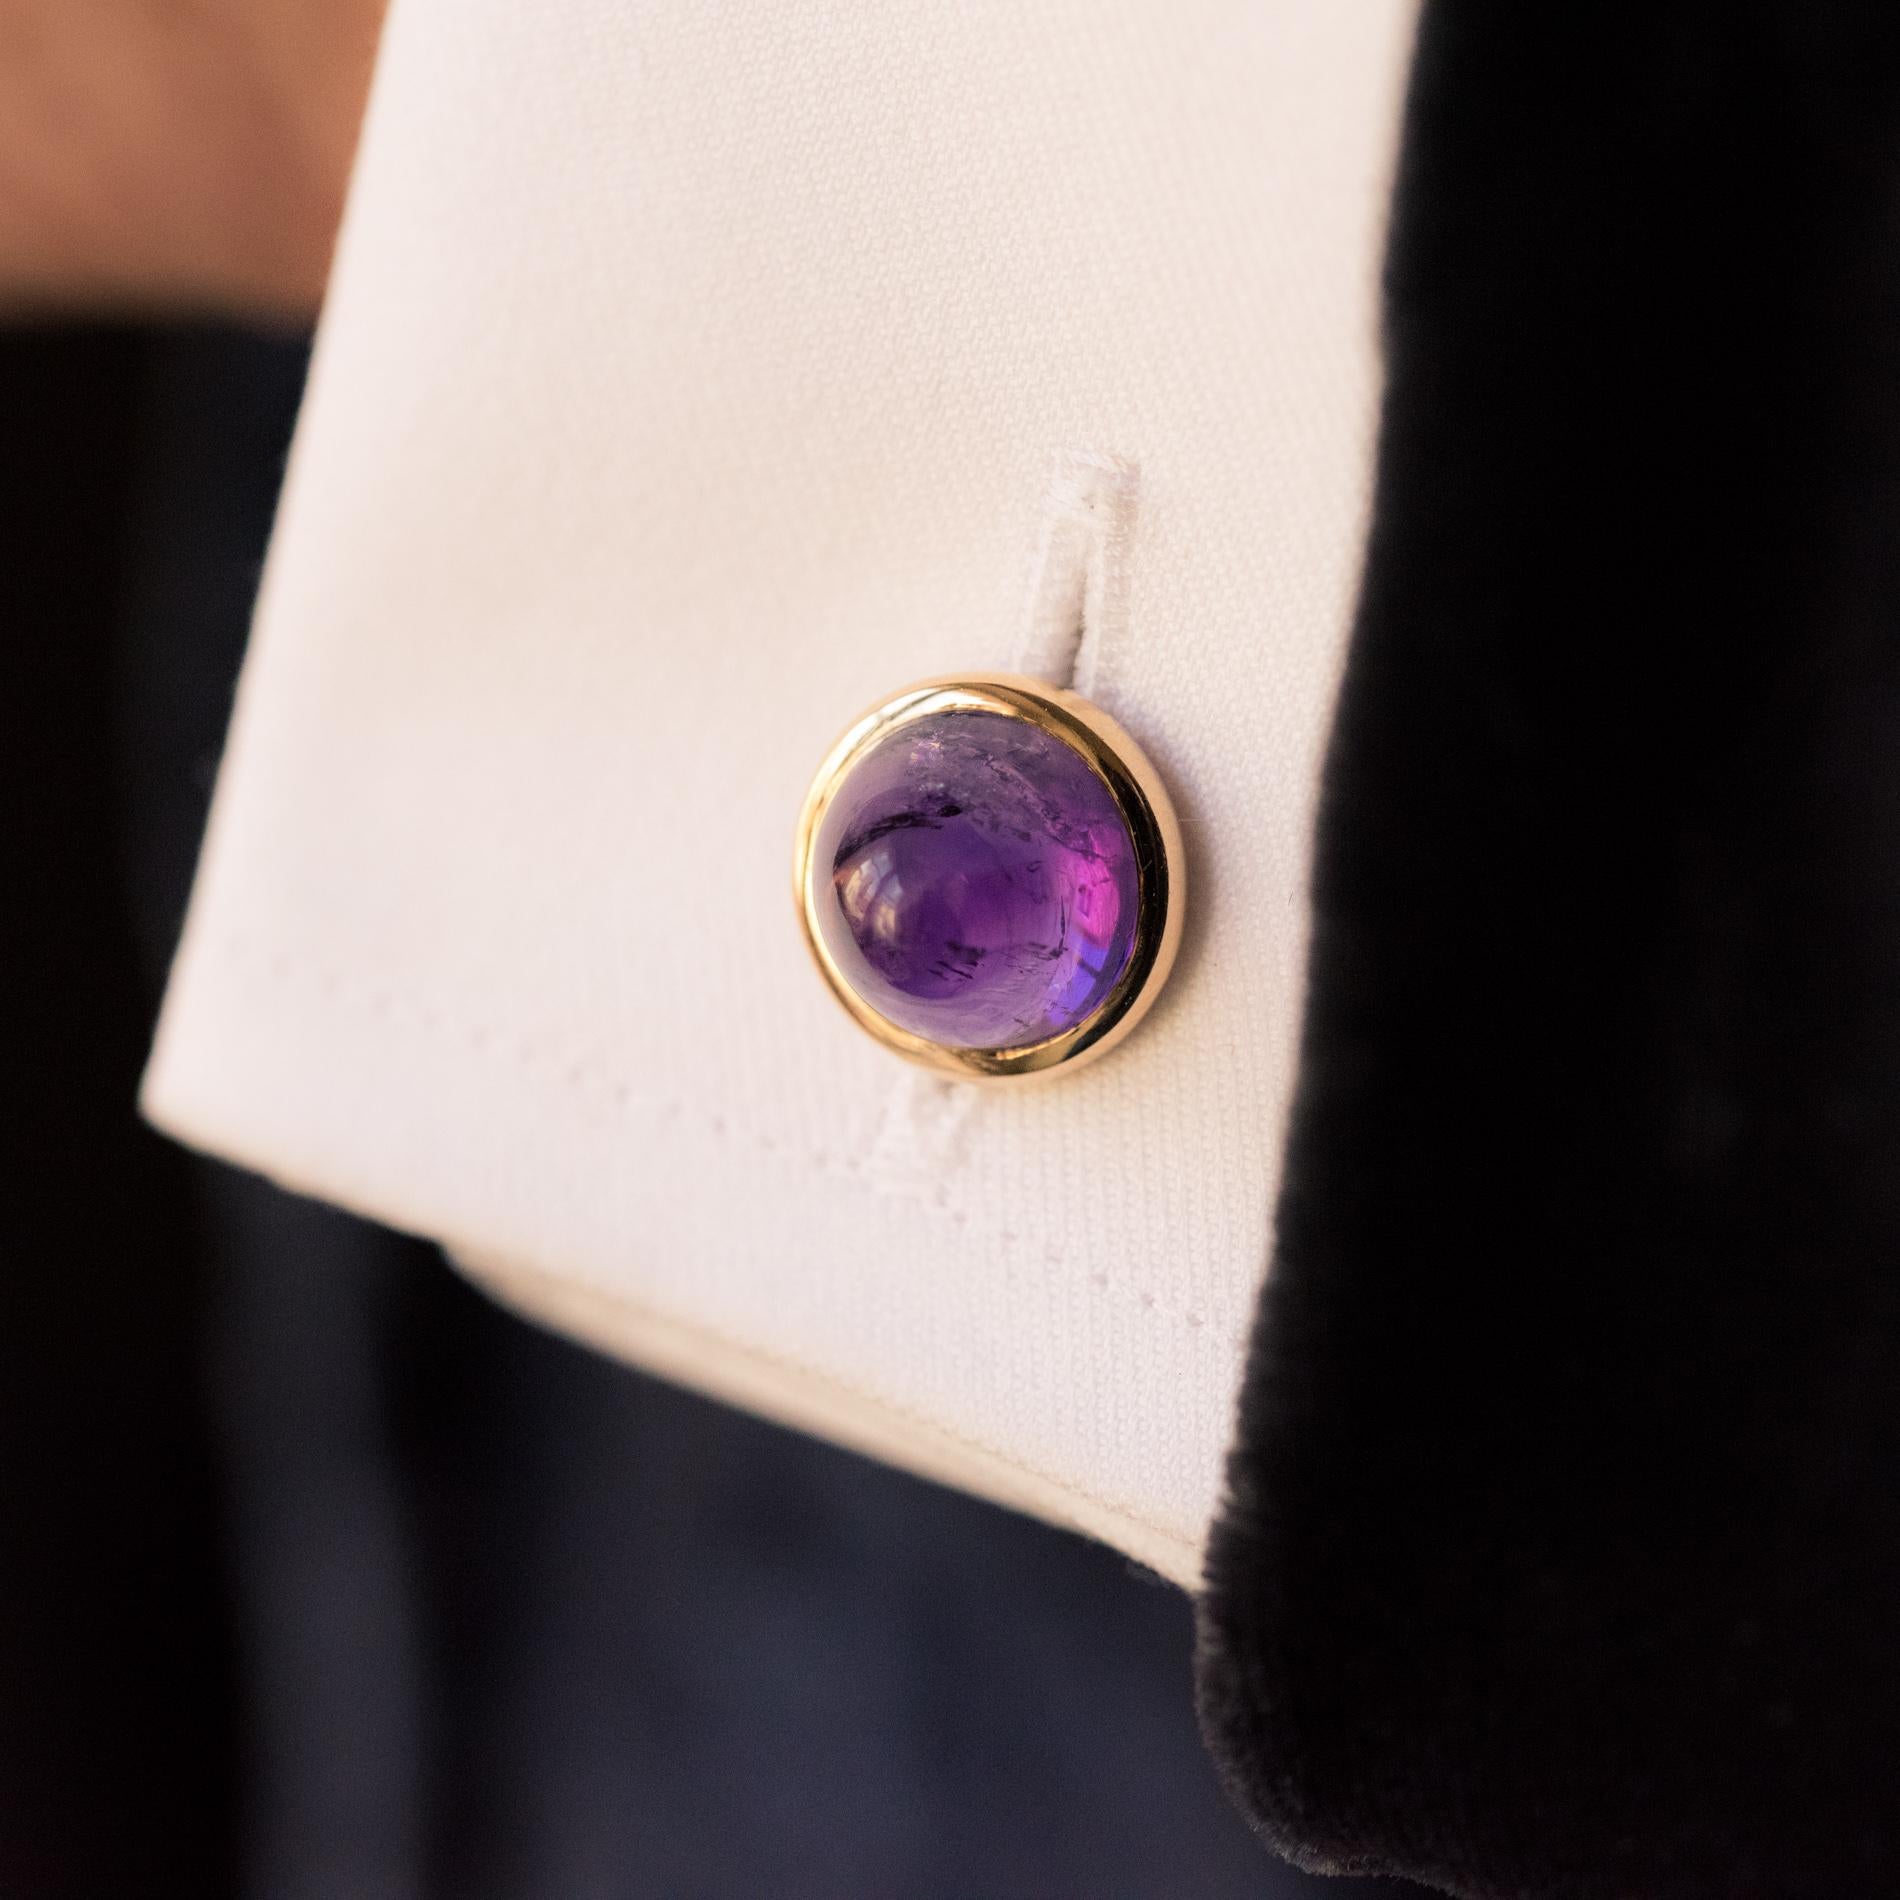 Pair of cufflinks in 18 karat yellow gold, eagle's head hallmark.
Each antique, round cufflink is adorned with a sugar loaf amethyst in a closed setting and retained with a gold wheat grain, by three small links.
Diameter: 12.5mm, thickness: about